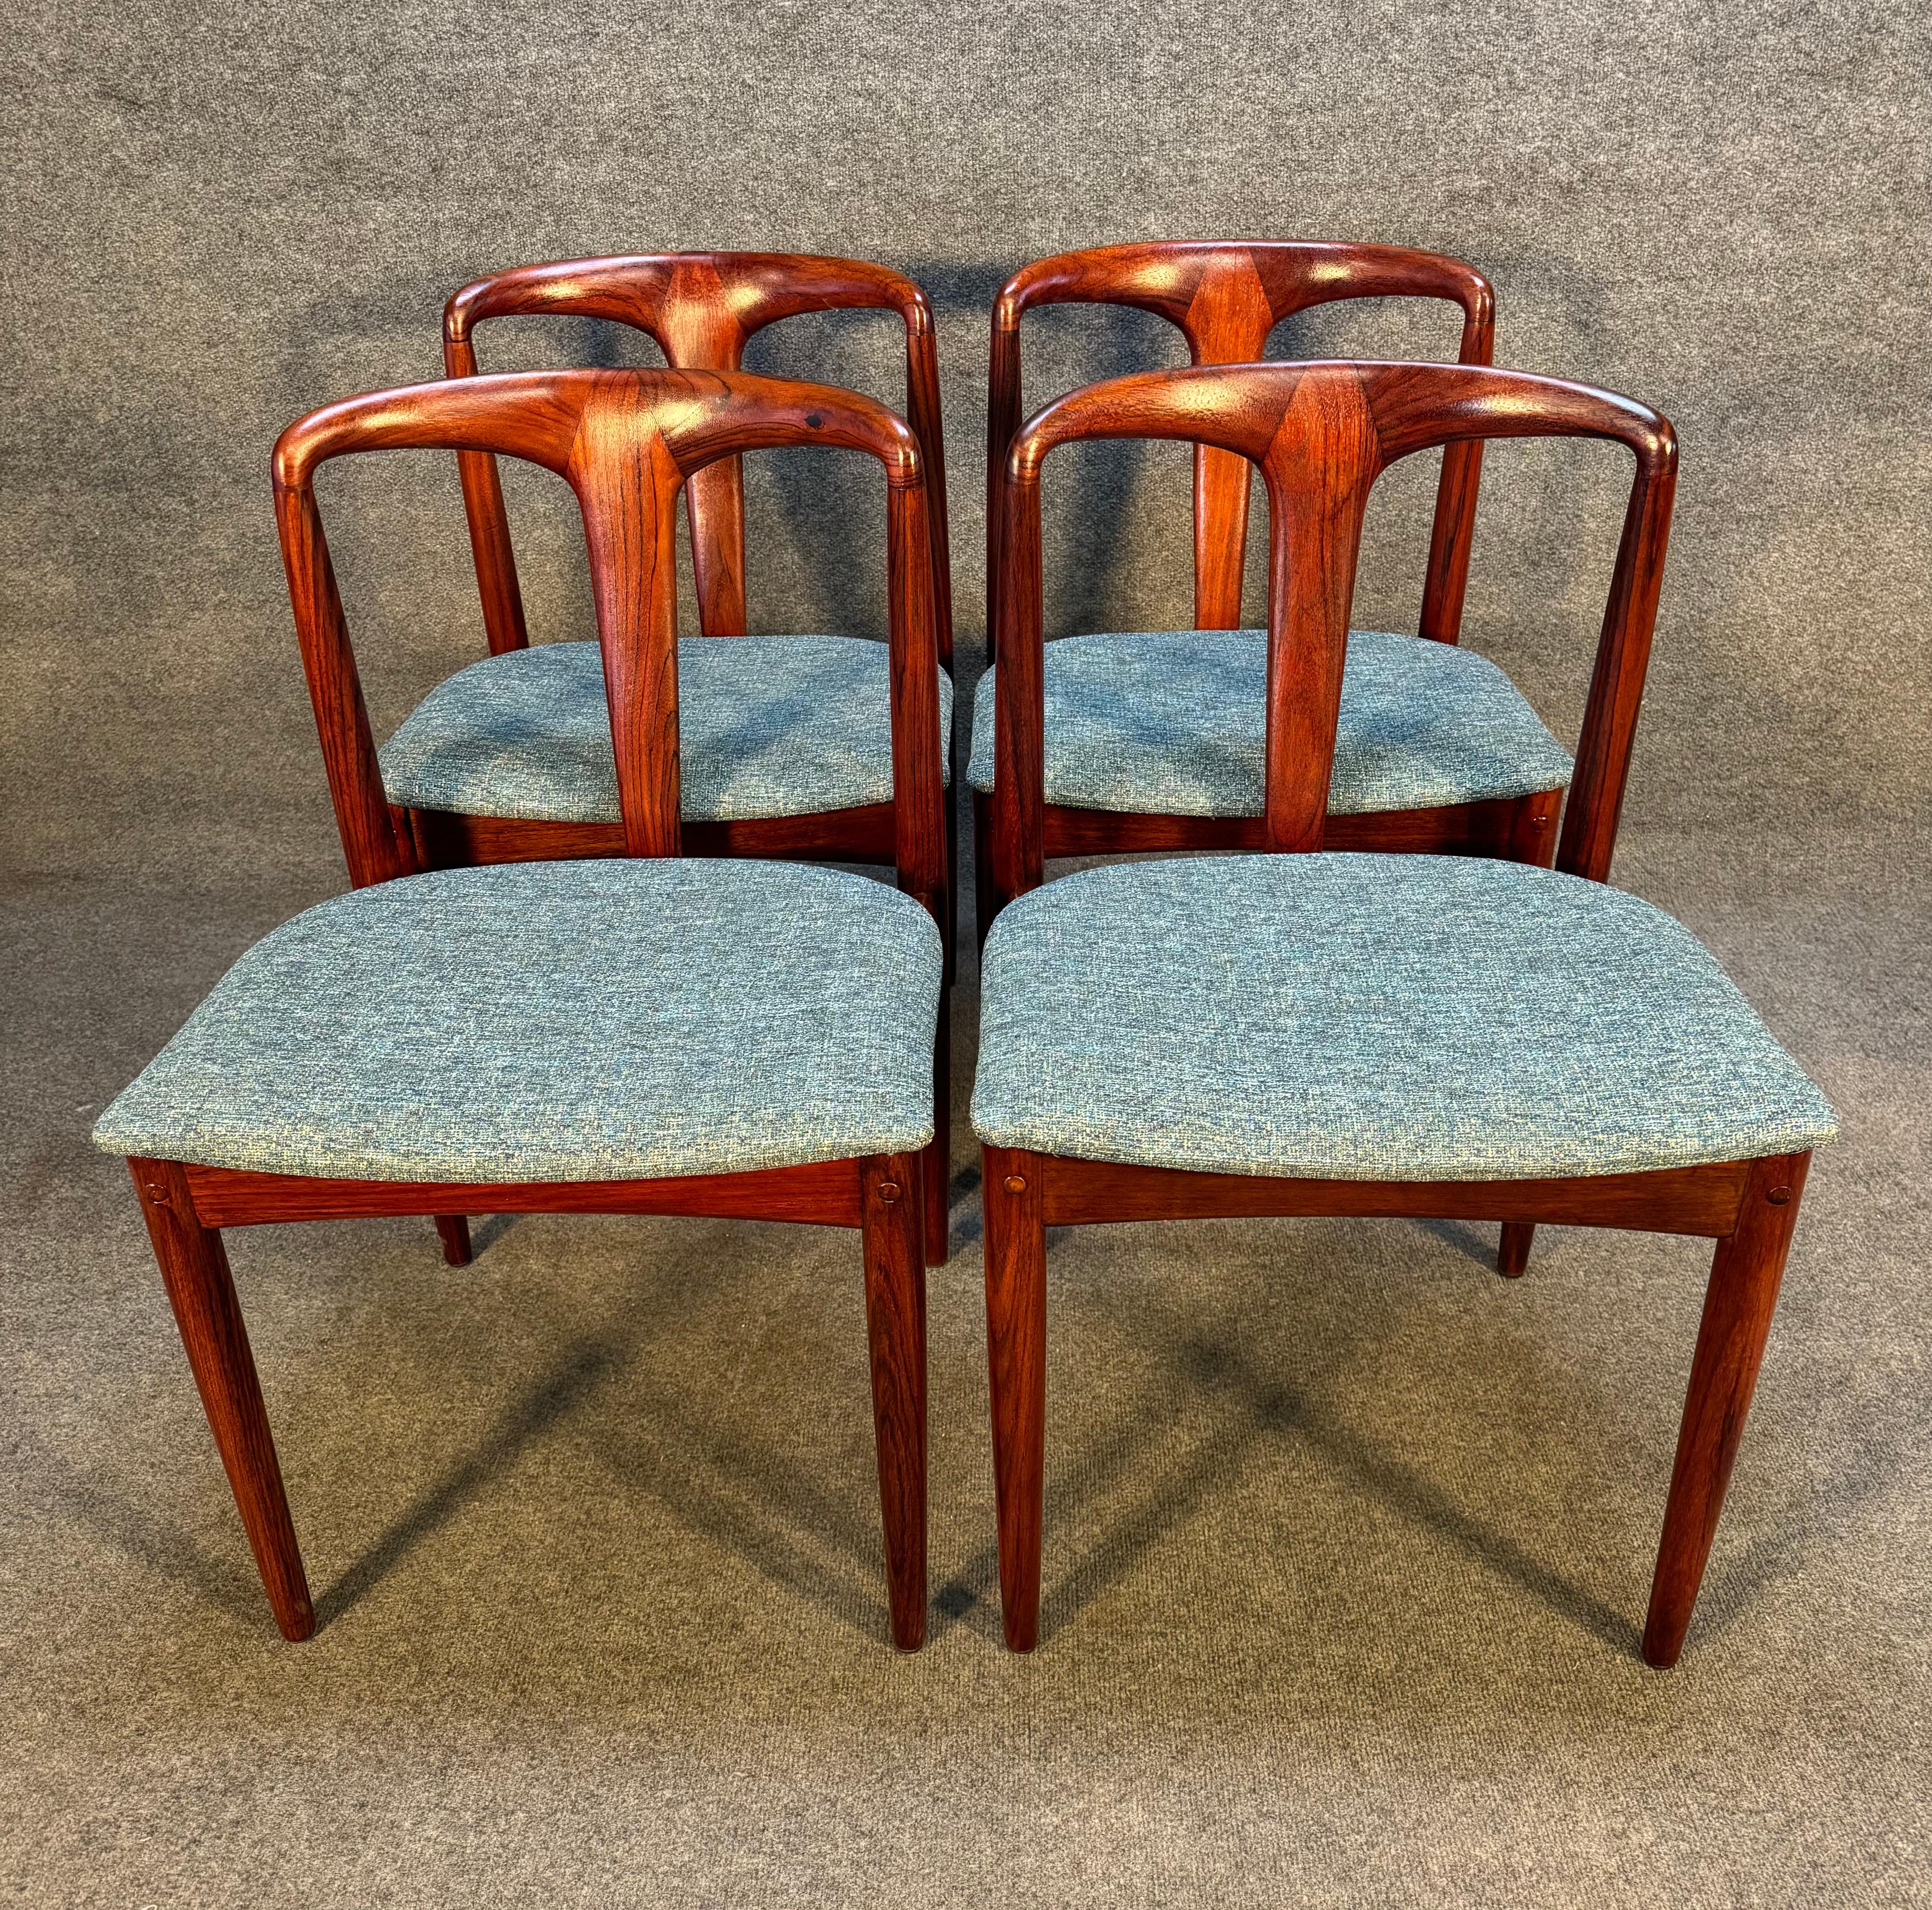 Here is a beautiful set of 4 vintage Scandinavian modern rosewood dining chairs model